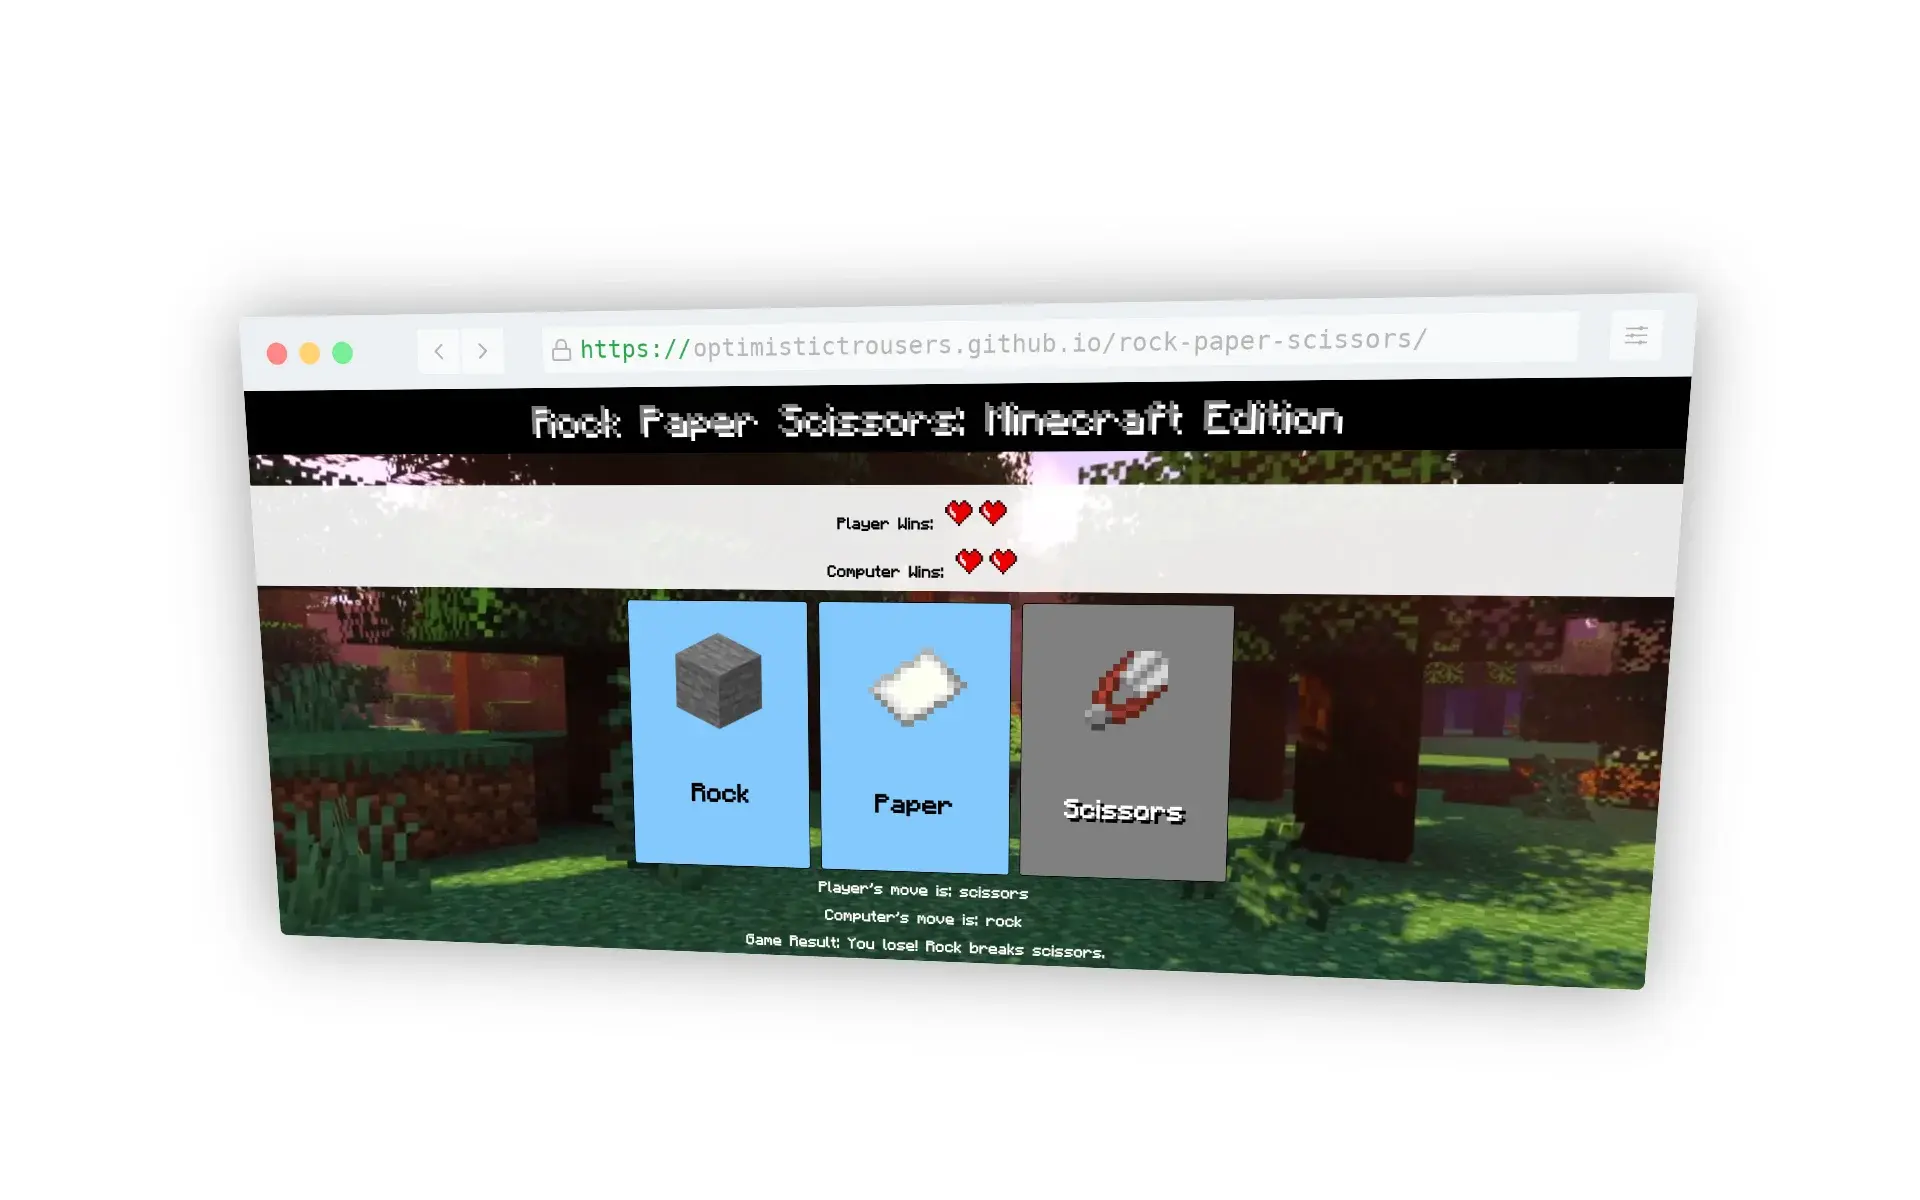 Screenshot of a 'Rock Paper Scissors: Minecraft Edition' web application in a browser. It displays Minecraft-themed choices of Rock, Paper, and Scissors with corresponding images. The top section shows the title with a forested Minecraft background. Below are score indicators for the player and computer, and a result statement from a played round.